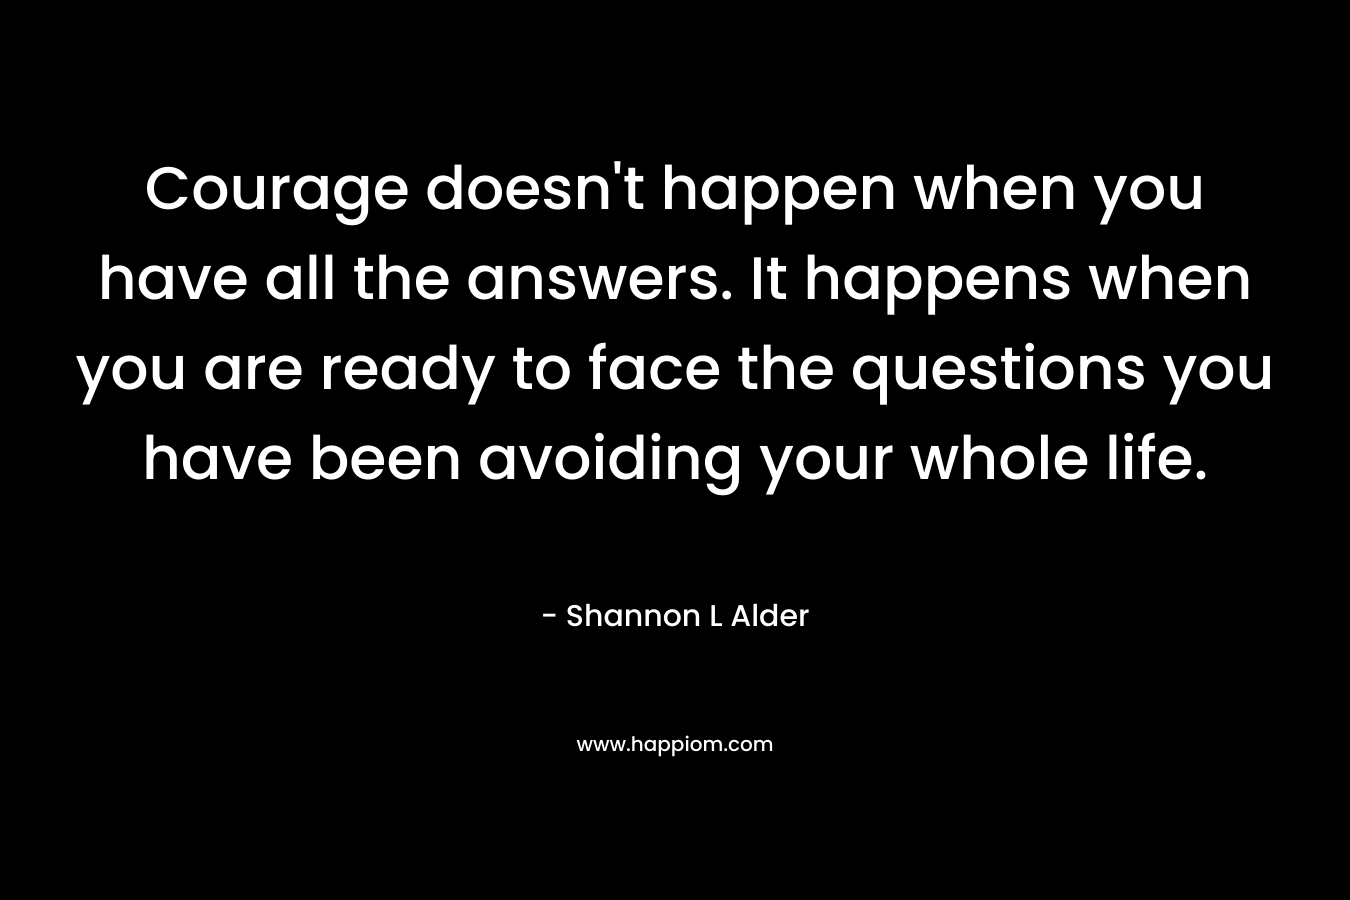 Courage doesn't happen when you have all the answers. It happens when you are ready to face the questions you have been avoiding your whole life.